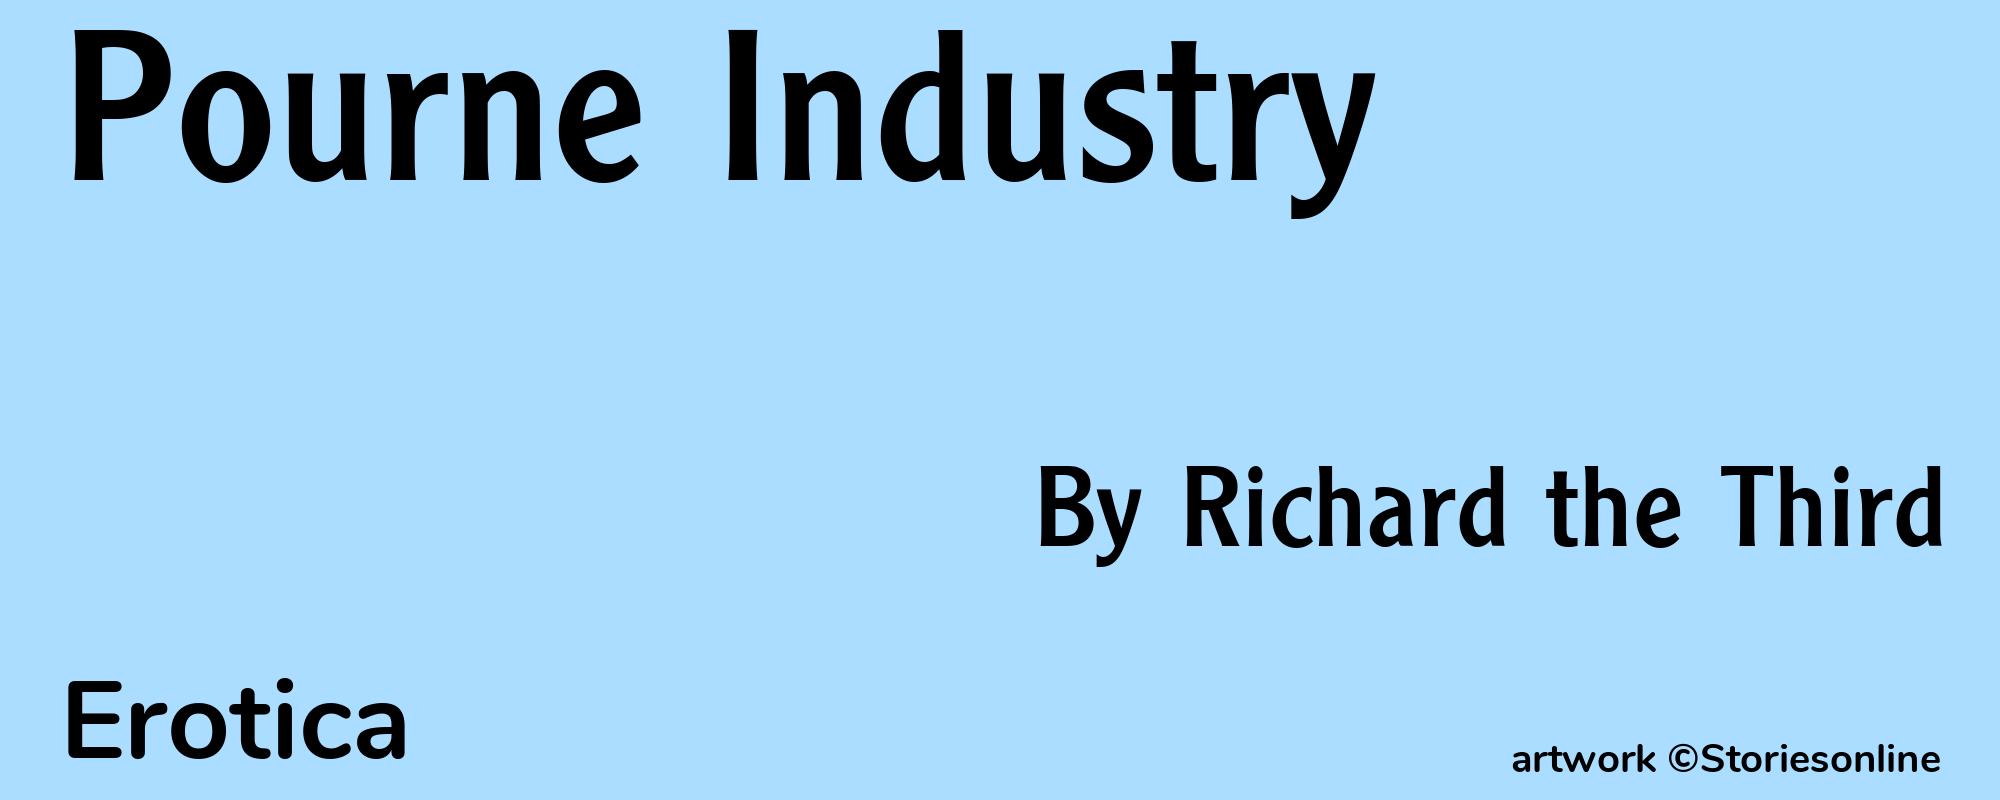 Pourne Industry - Cover